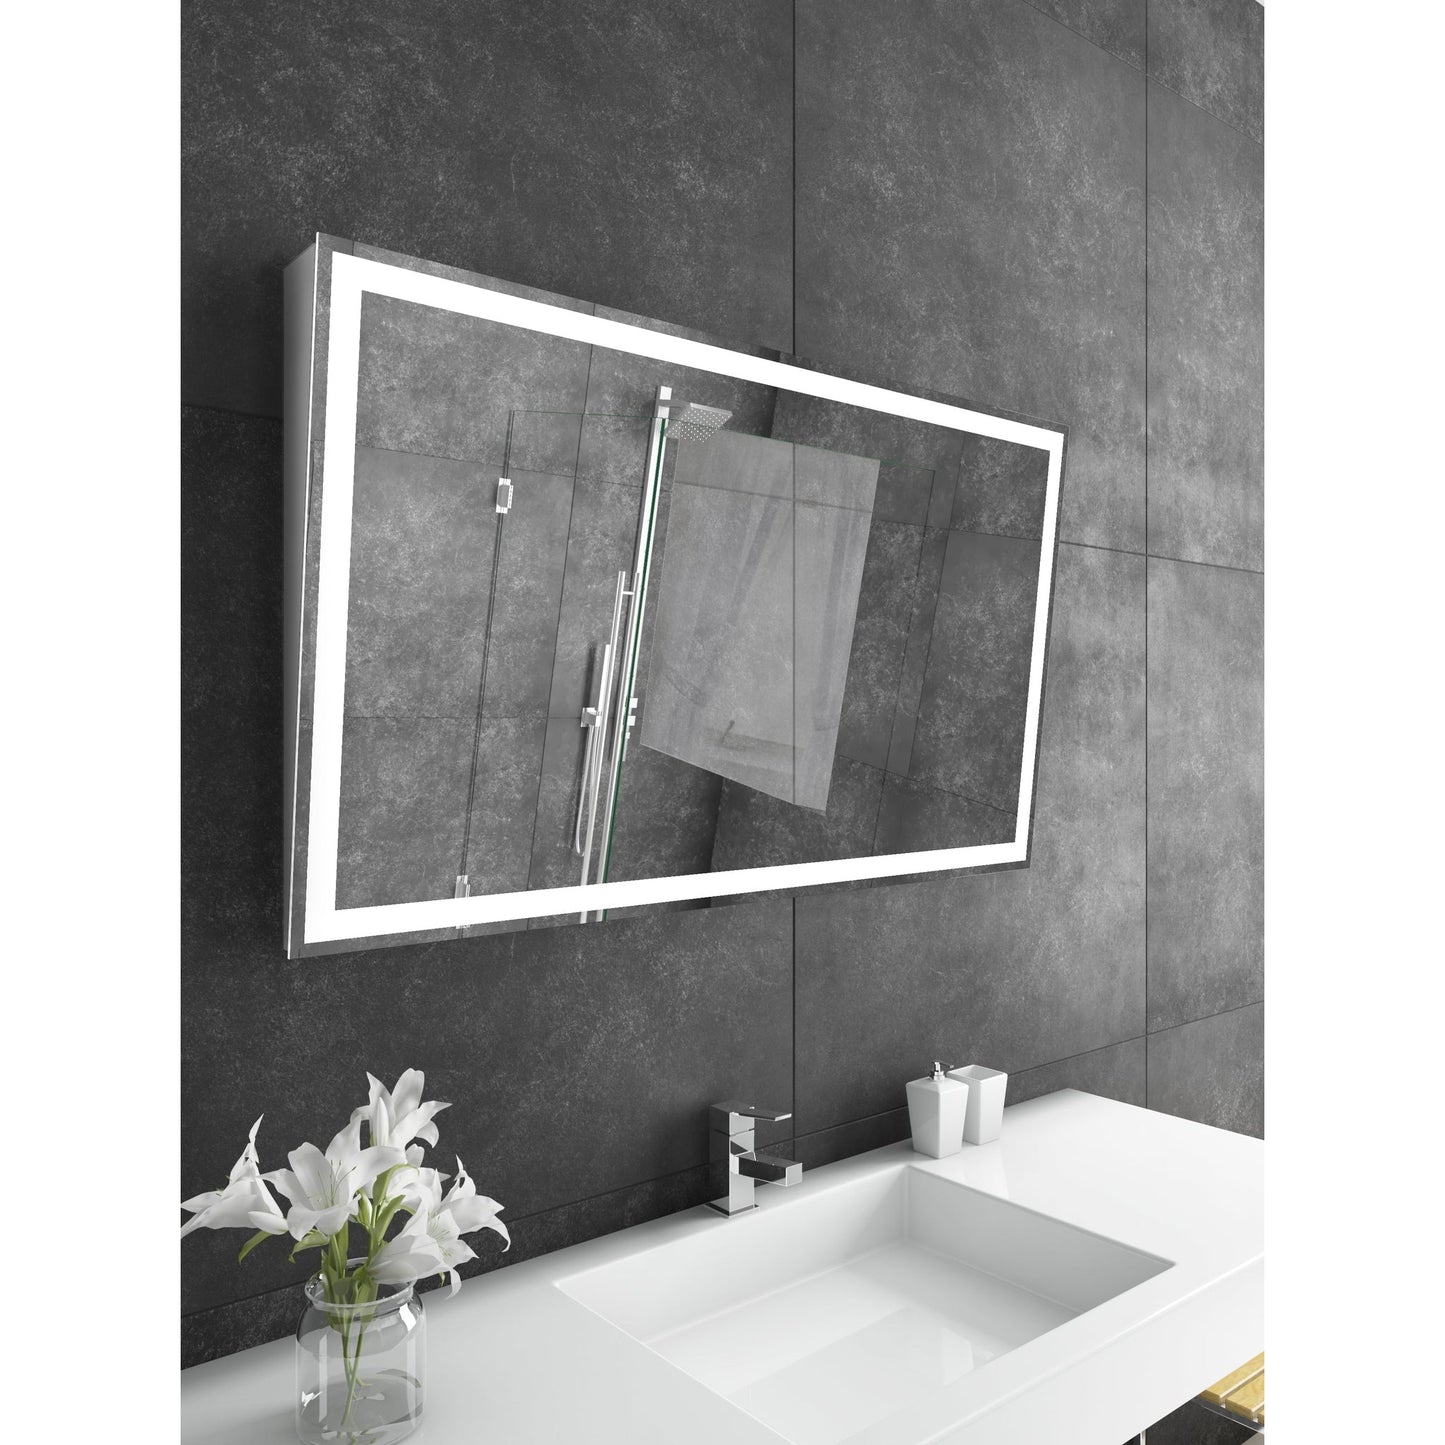 Paris Mirror Adira 48" x 28" Silver Front-Lit Lighted Super Bright Dimmable Wall-Mounted 3000K LED Mirror With Tilted Top Frame